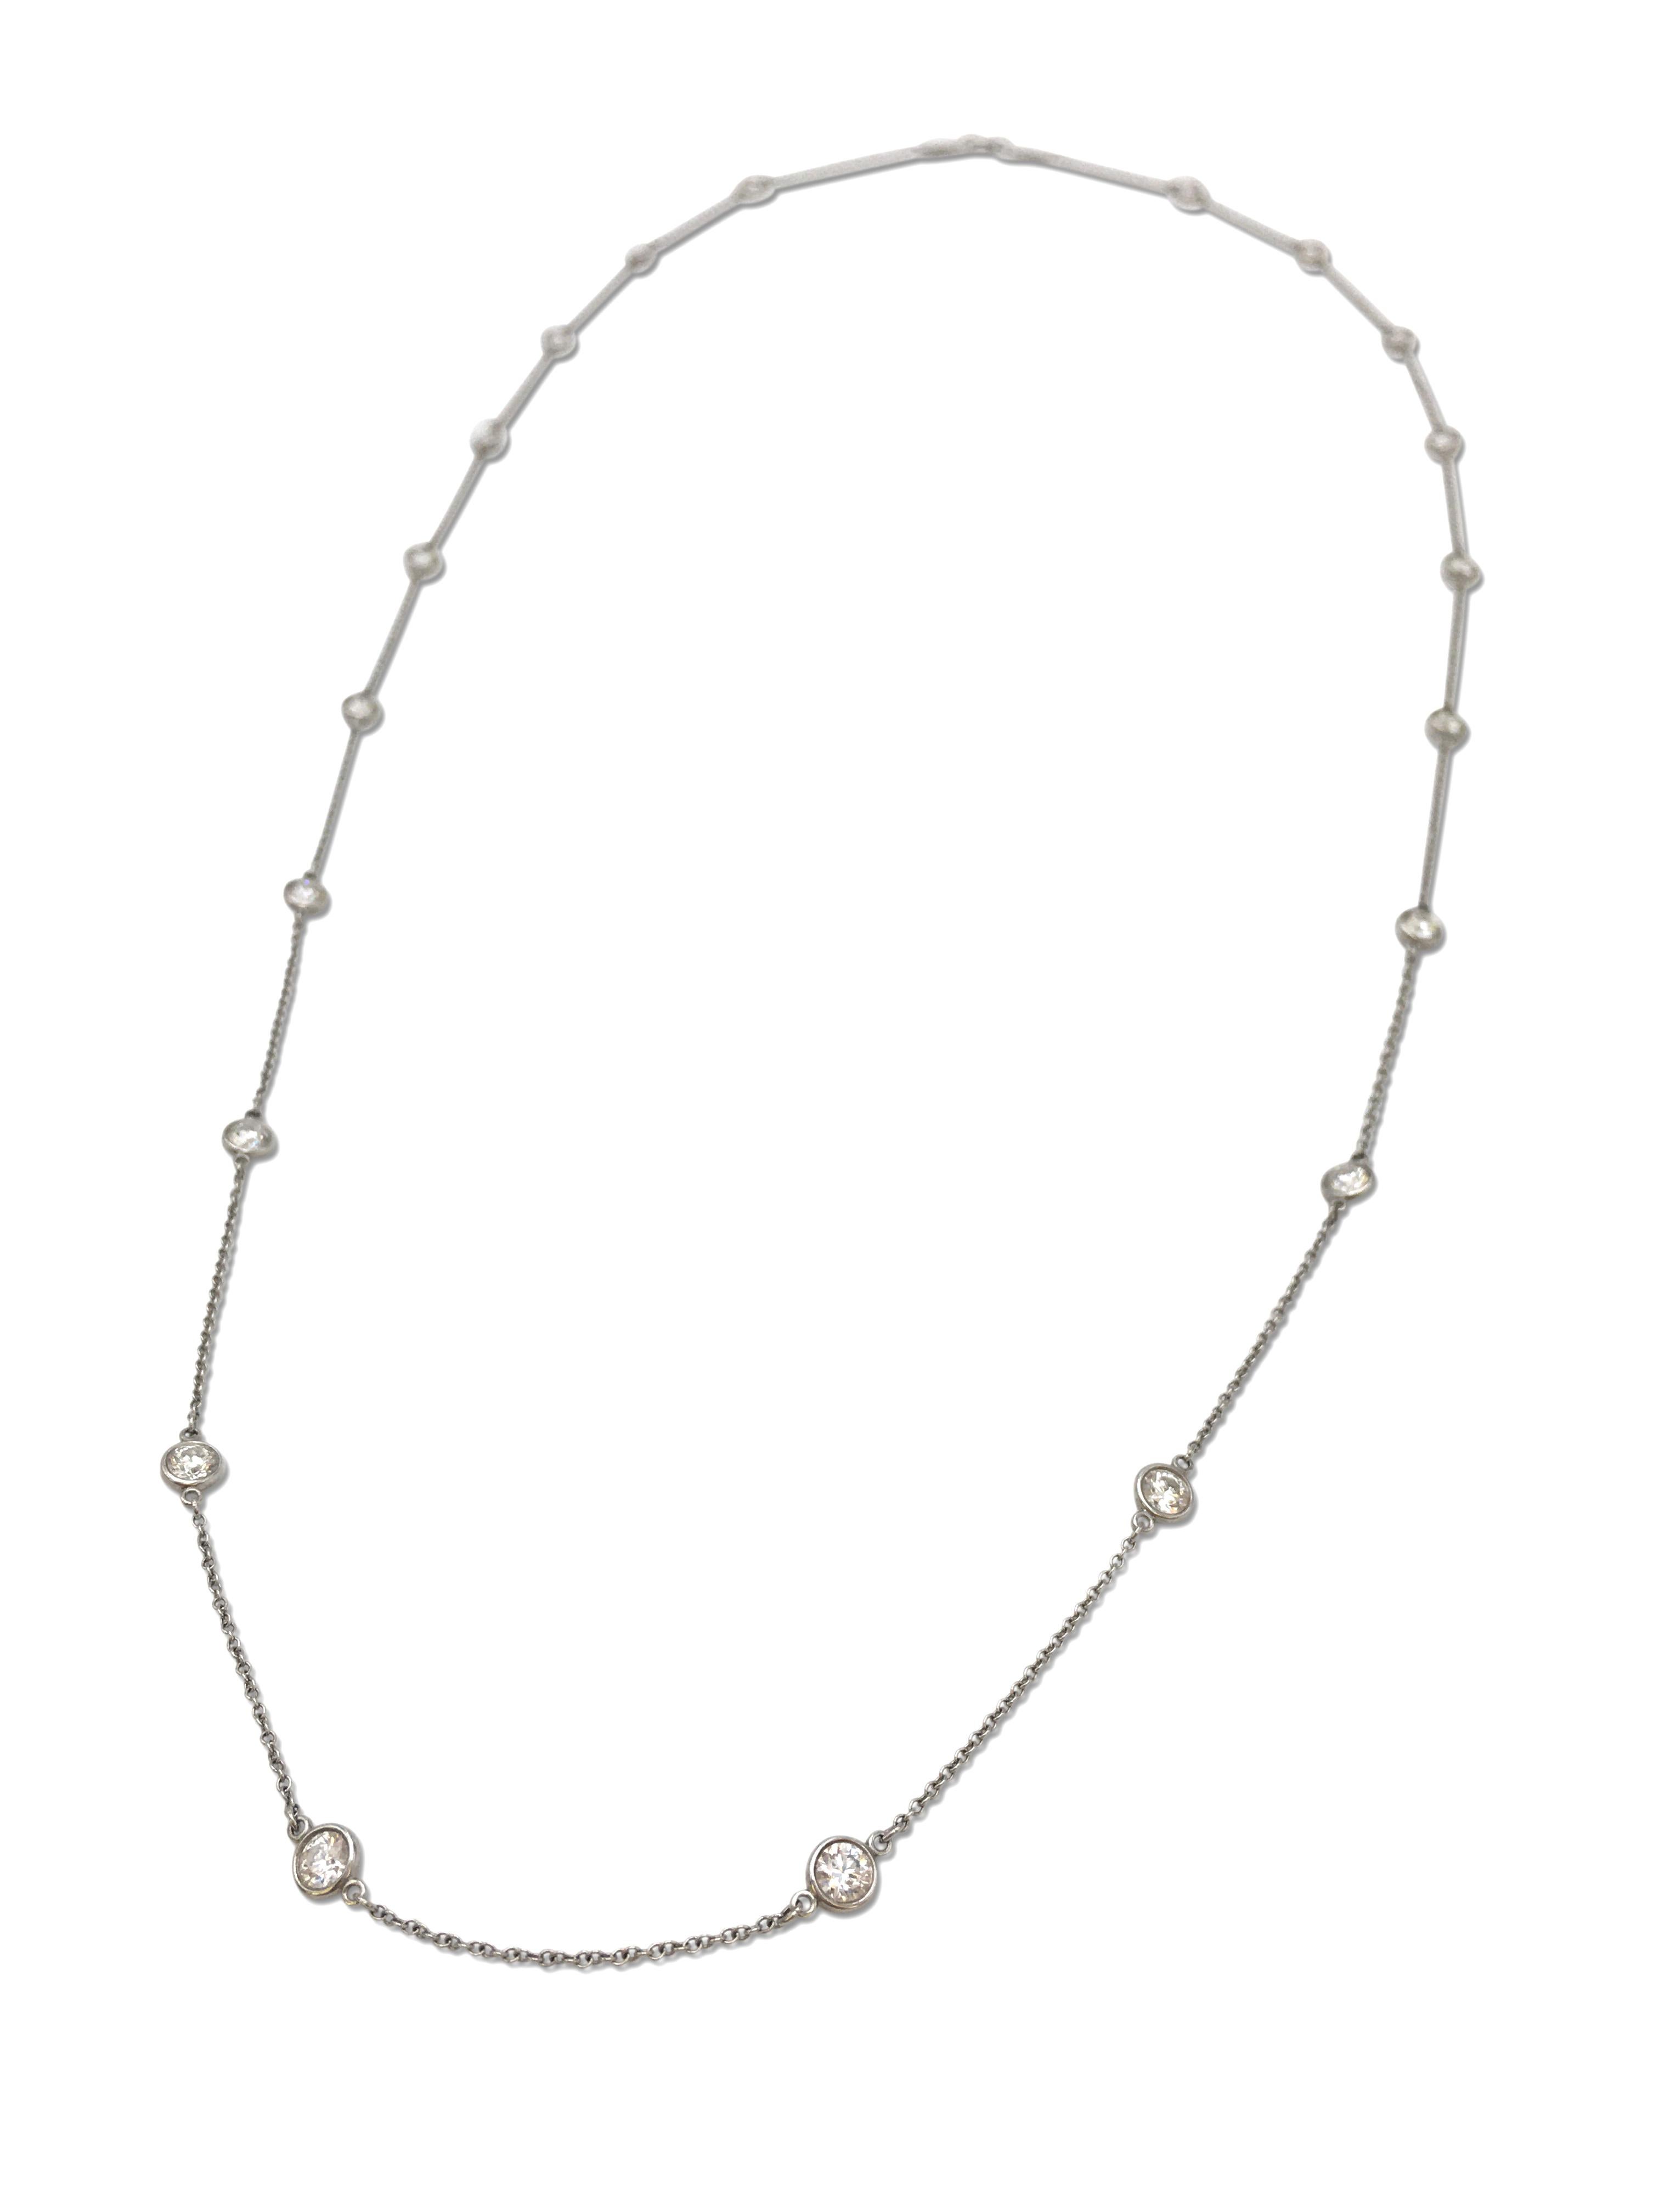 Authentic Tiffany & Co. Elsa Peretti Diamonds by the Yard necklace. Bezel-set round brilliant cut diamonds (E-F in color, VS clarity) of an estimated 3.50 cttw in platinum. Signed Tiffany & Co., Peretti, PT 950, The necklace is 30 inches in length.